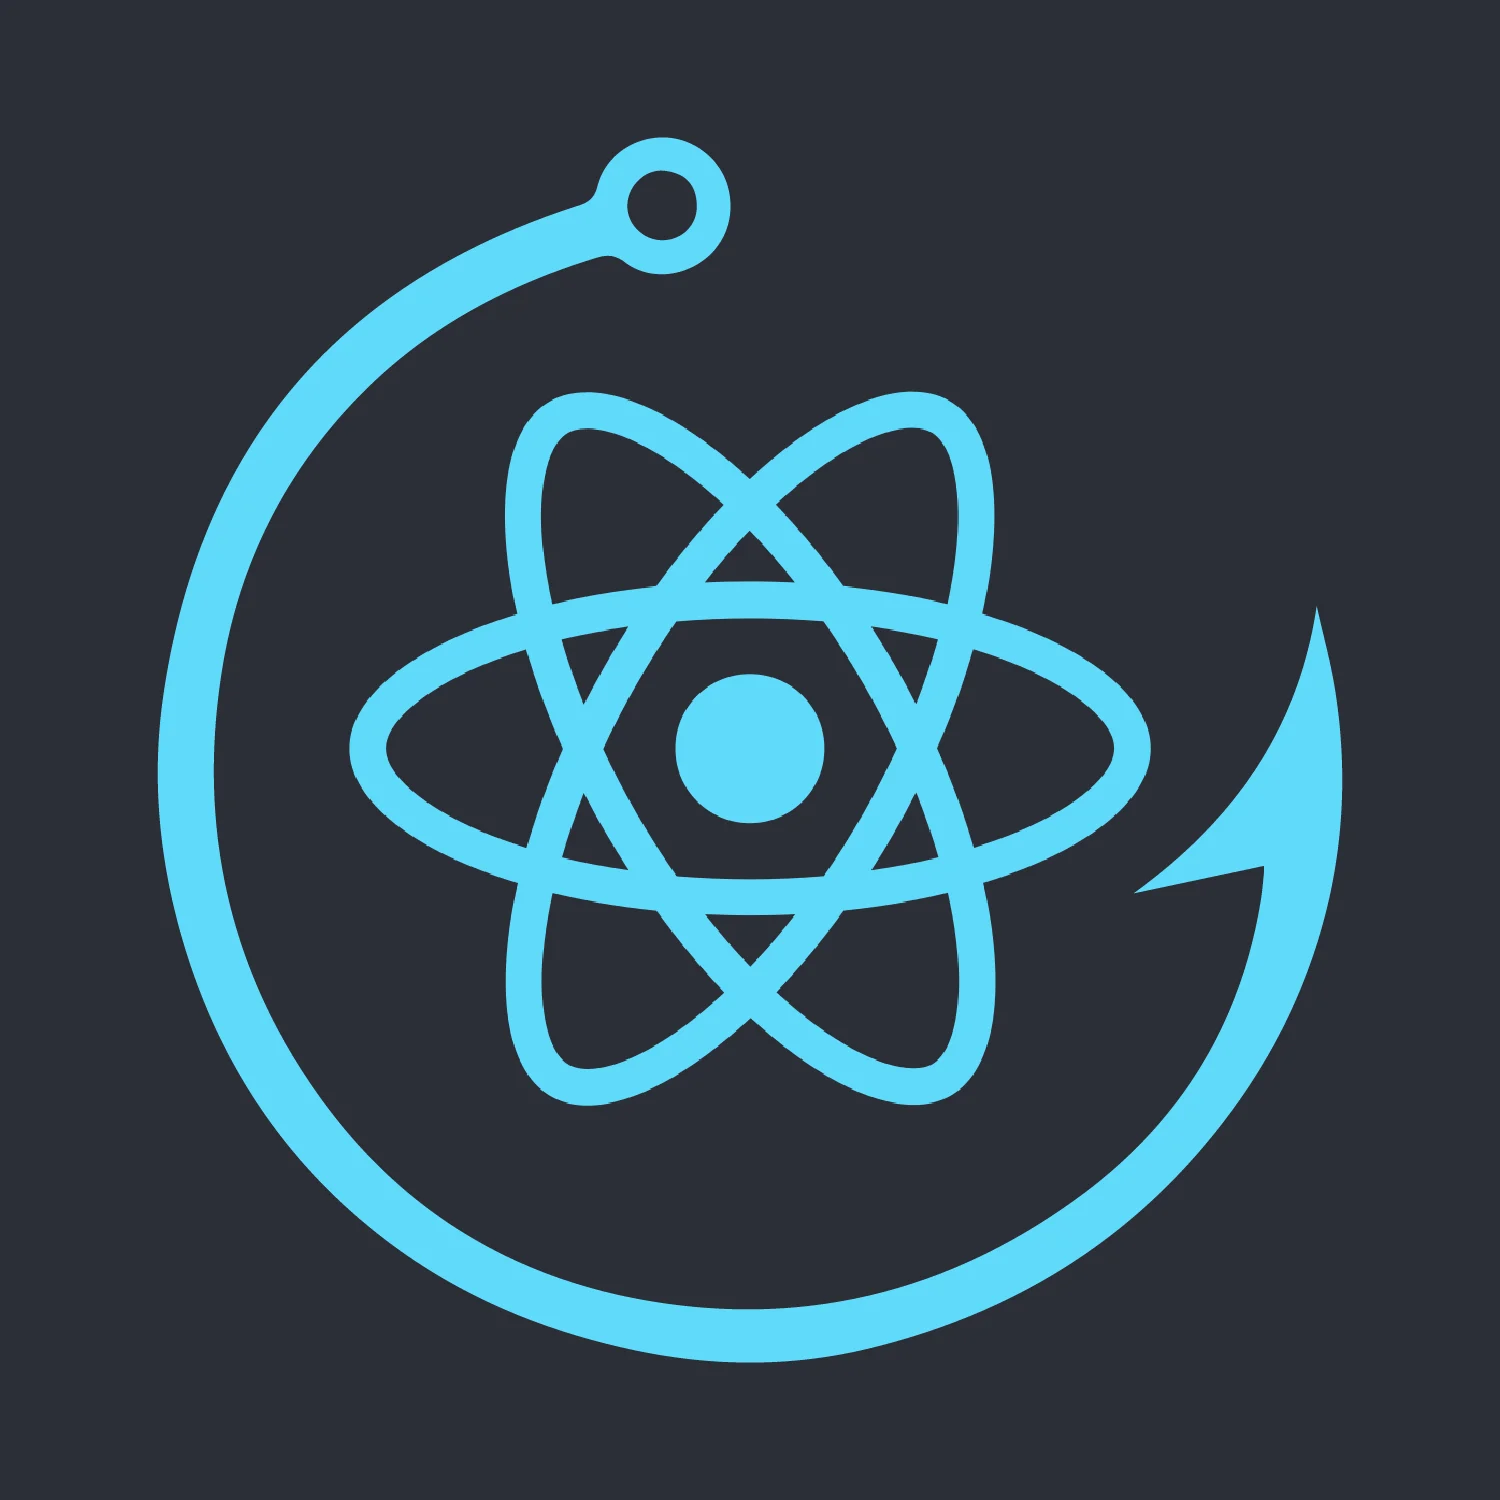 Transitioning from React class components to function components with hooks